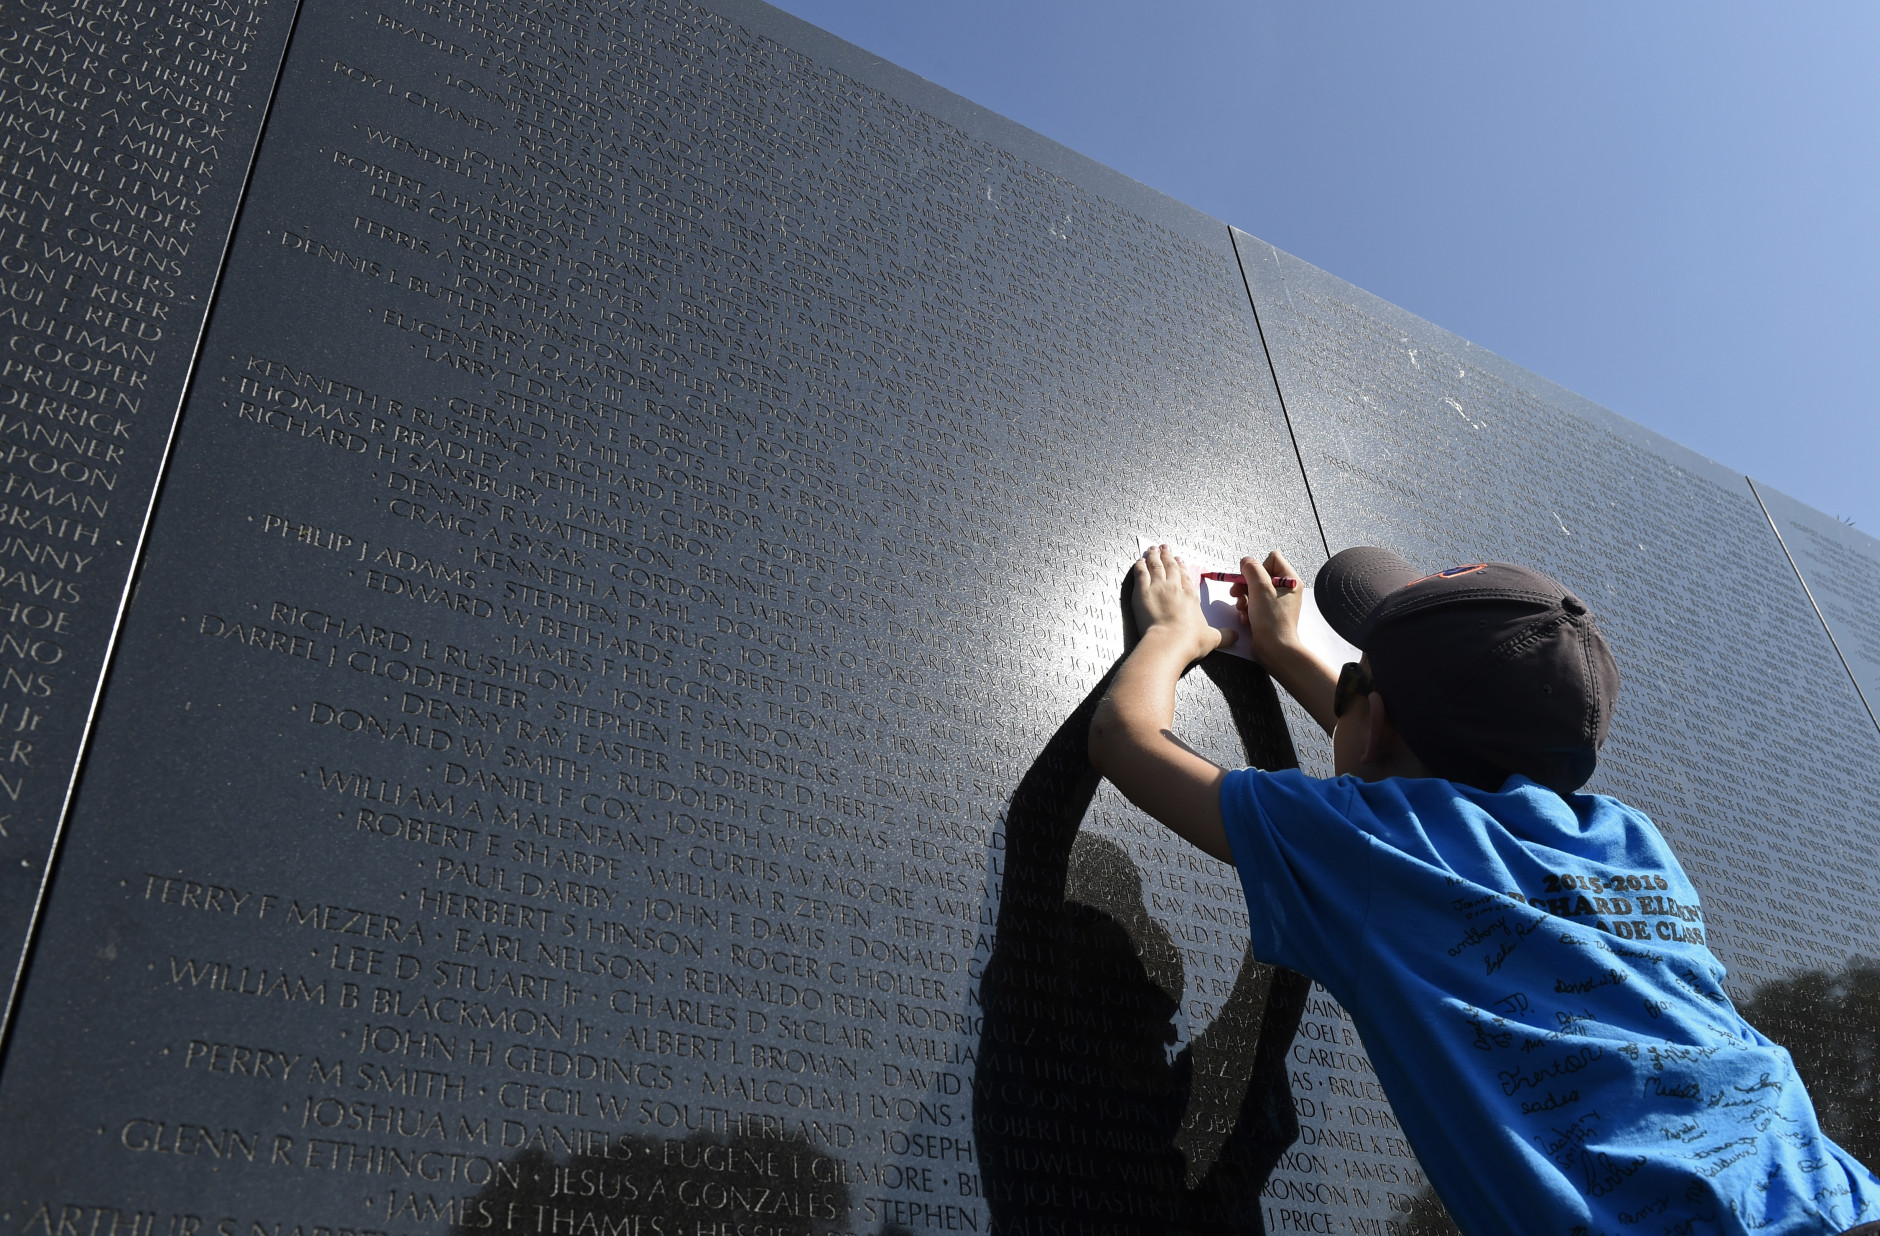 Zack Drake, 11, from Crab Orchard, W. Va., takes a rubbing of a name from the Vietnam War Memorial in Washington, Friday, May 27, 2016. The visit was part of the Crab Orchard Elementary School visit to Washington, on the start  of the Memorial Day weekend. (AP Photo/Susan Walsh)